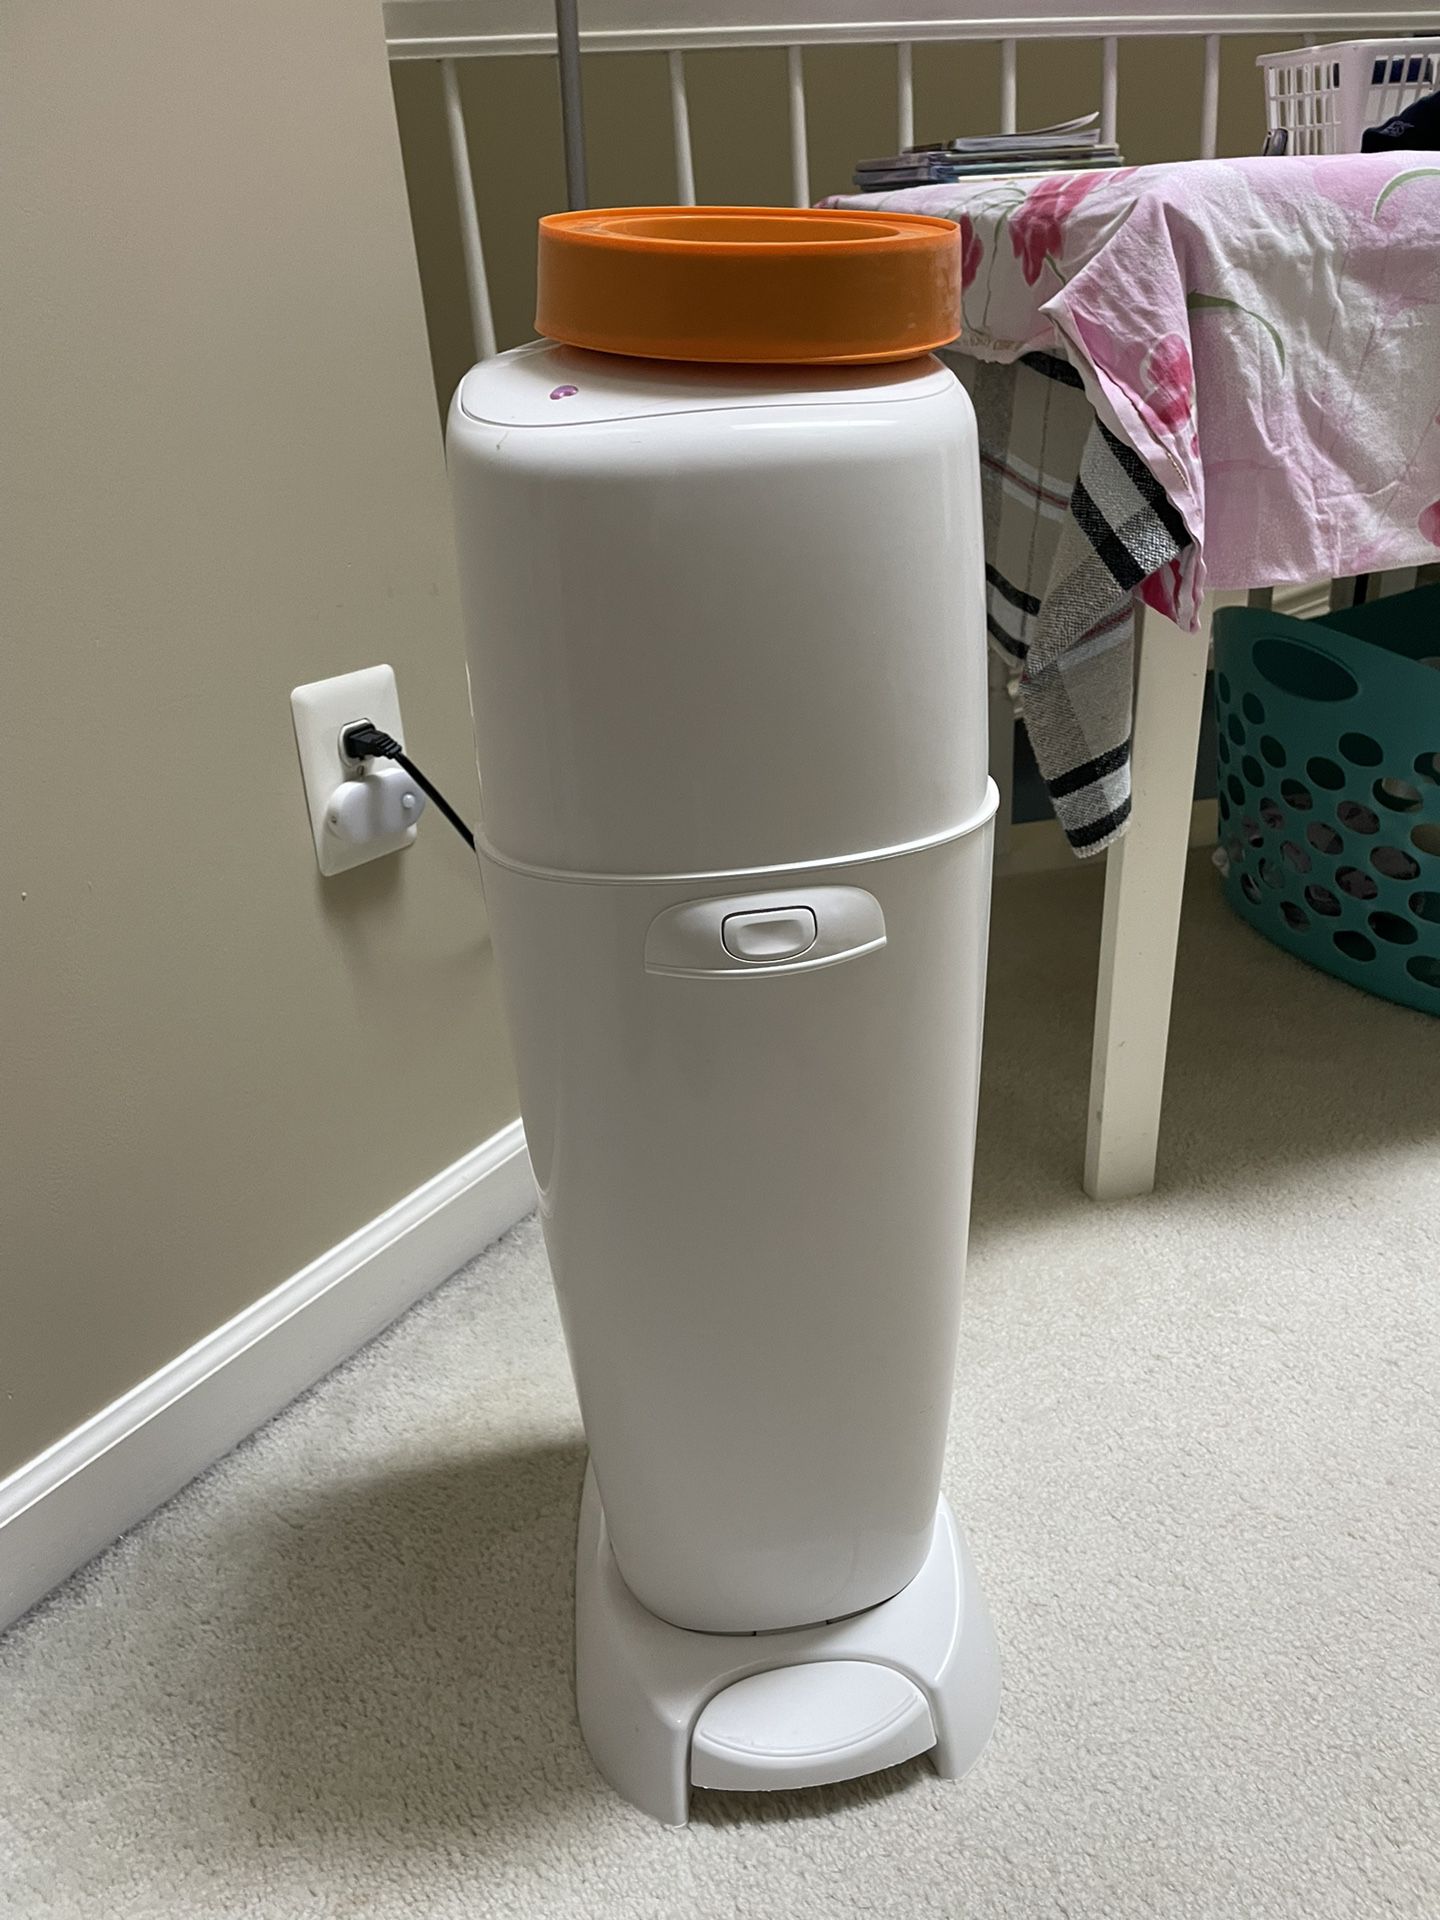 Diaper Pail With One Refill